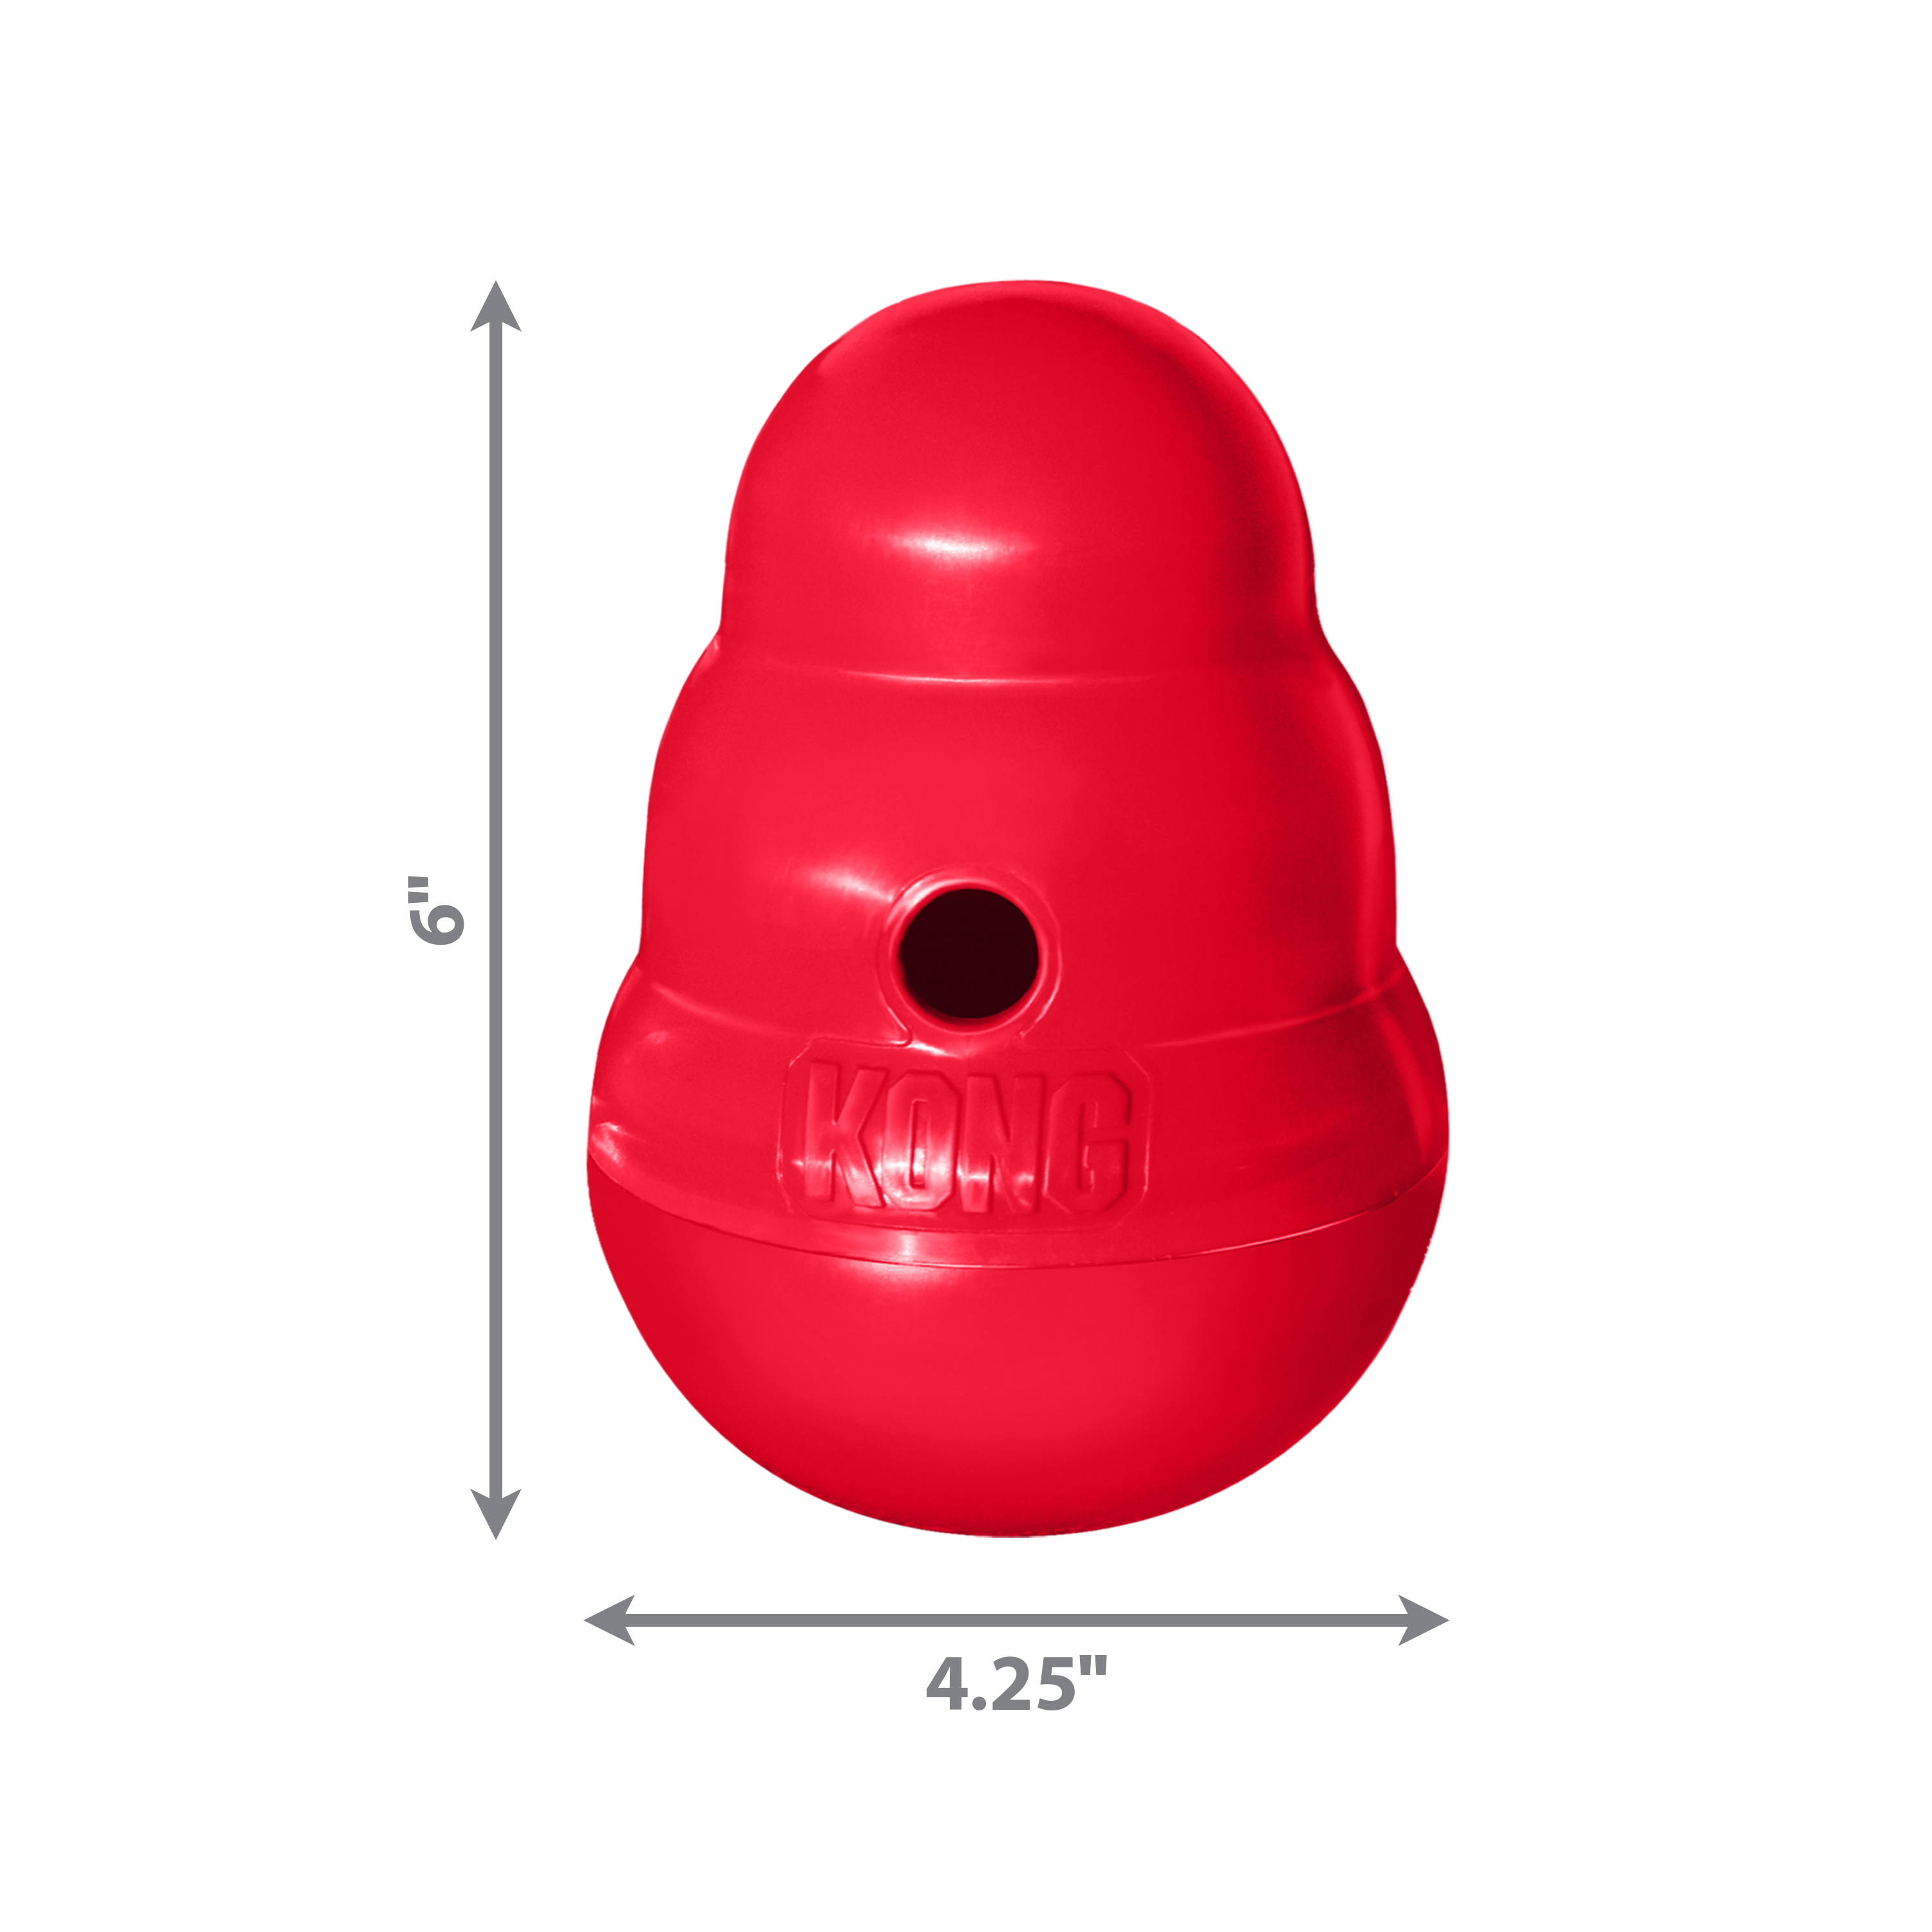 Wobbler dimoffpack product image